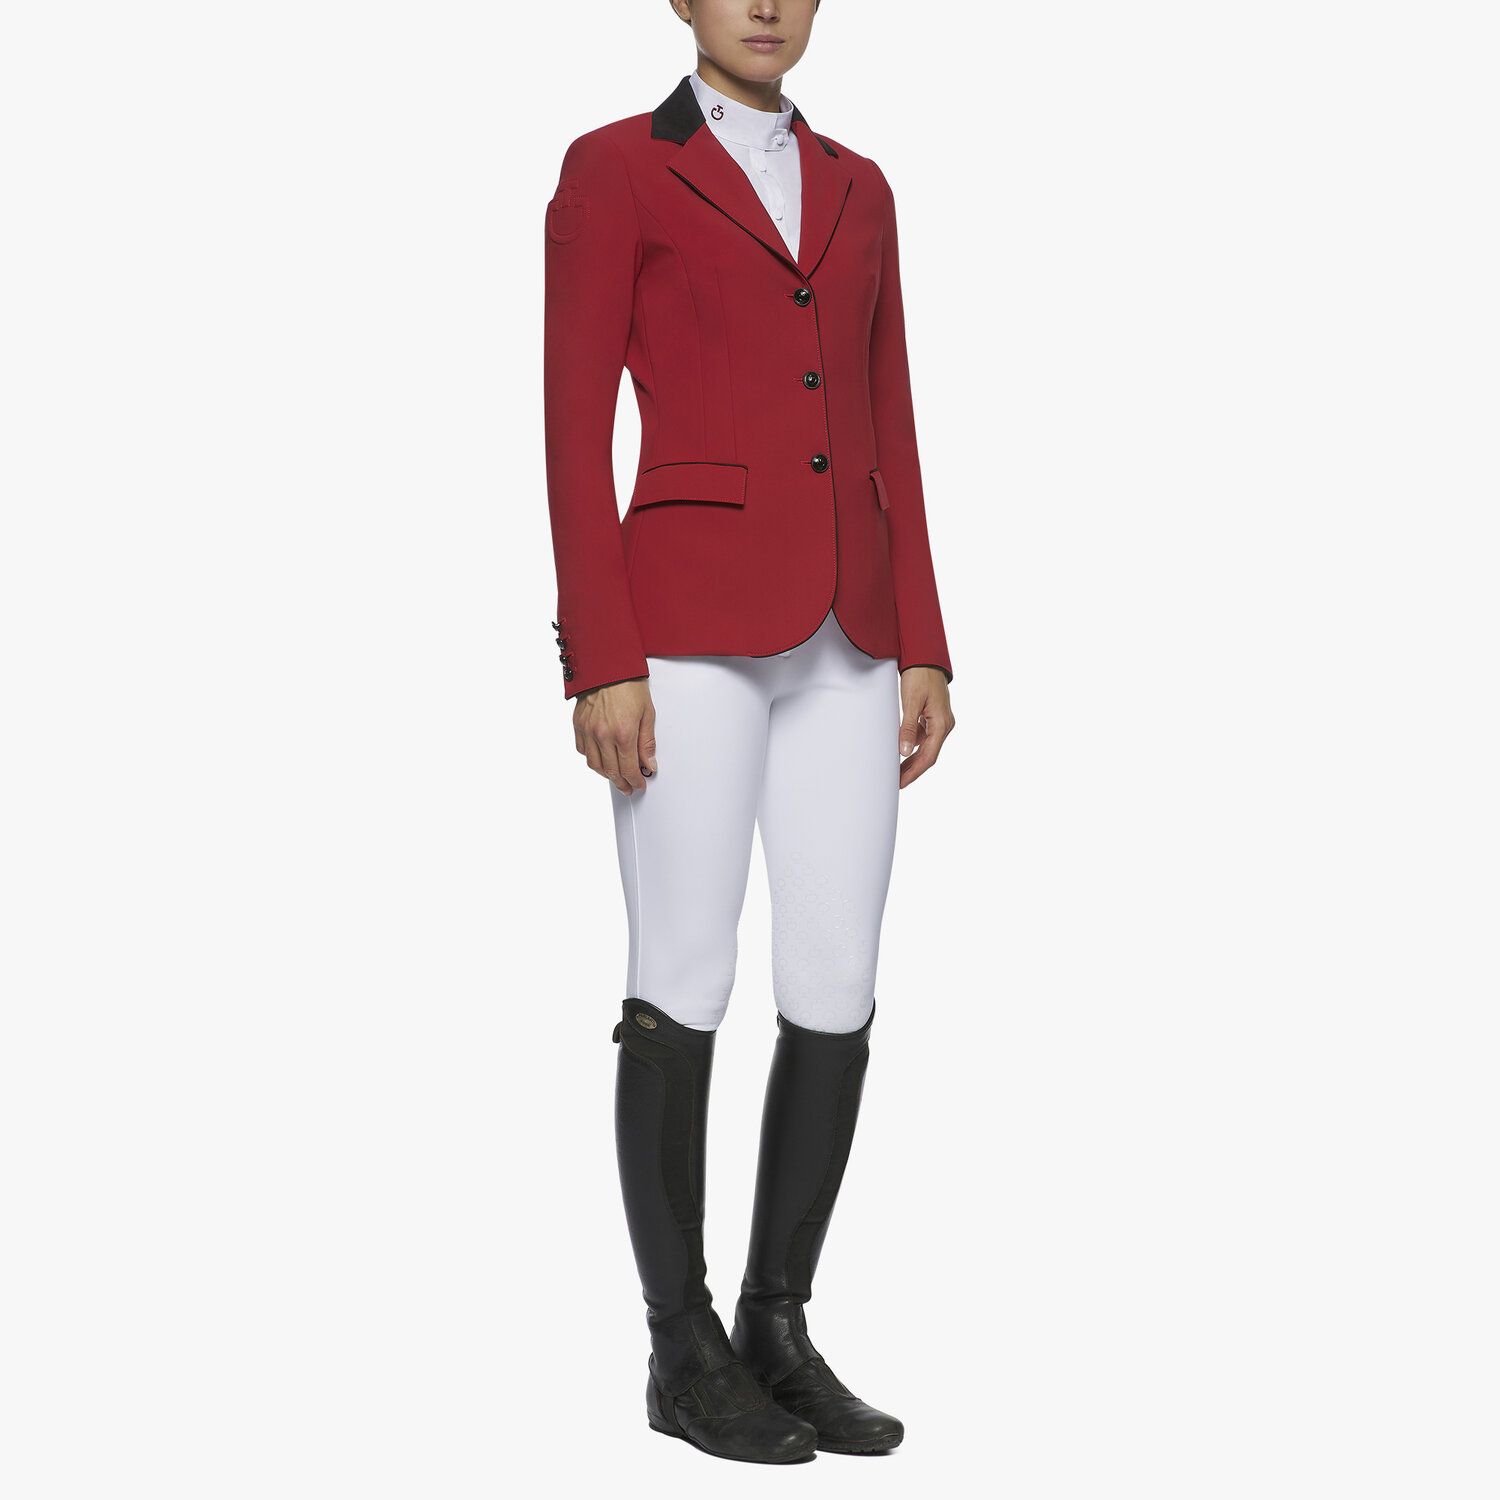 Cavalleria Toscana Women`s competition riding jacket RED-2